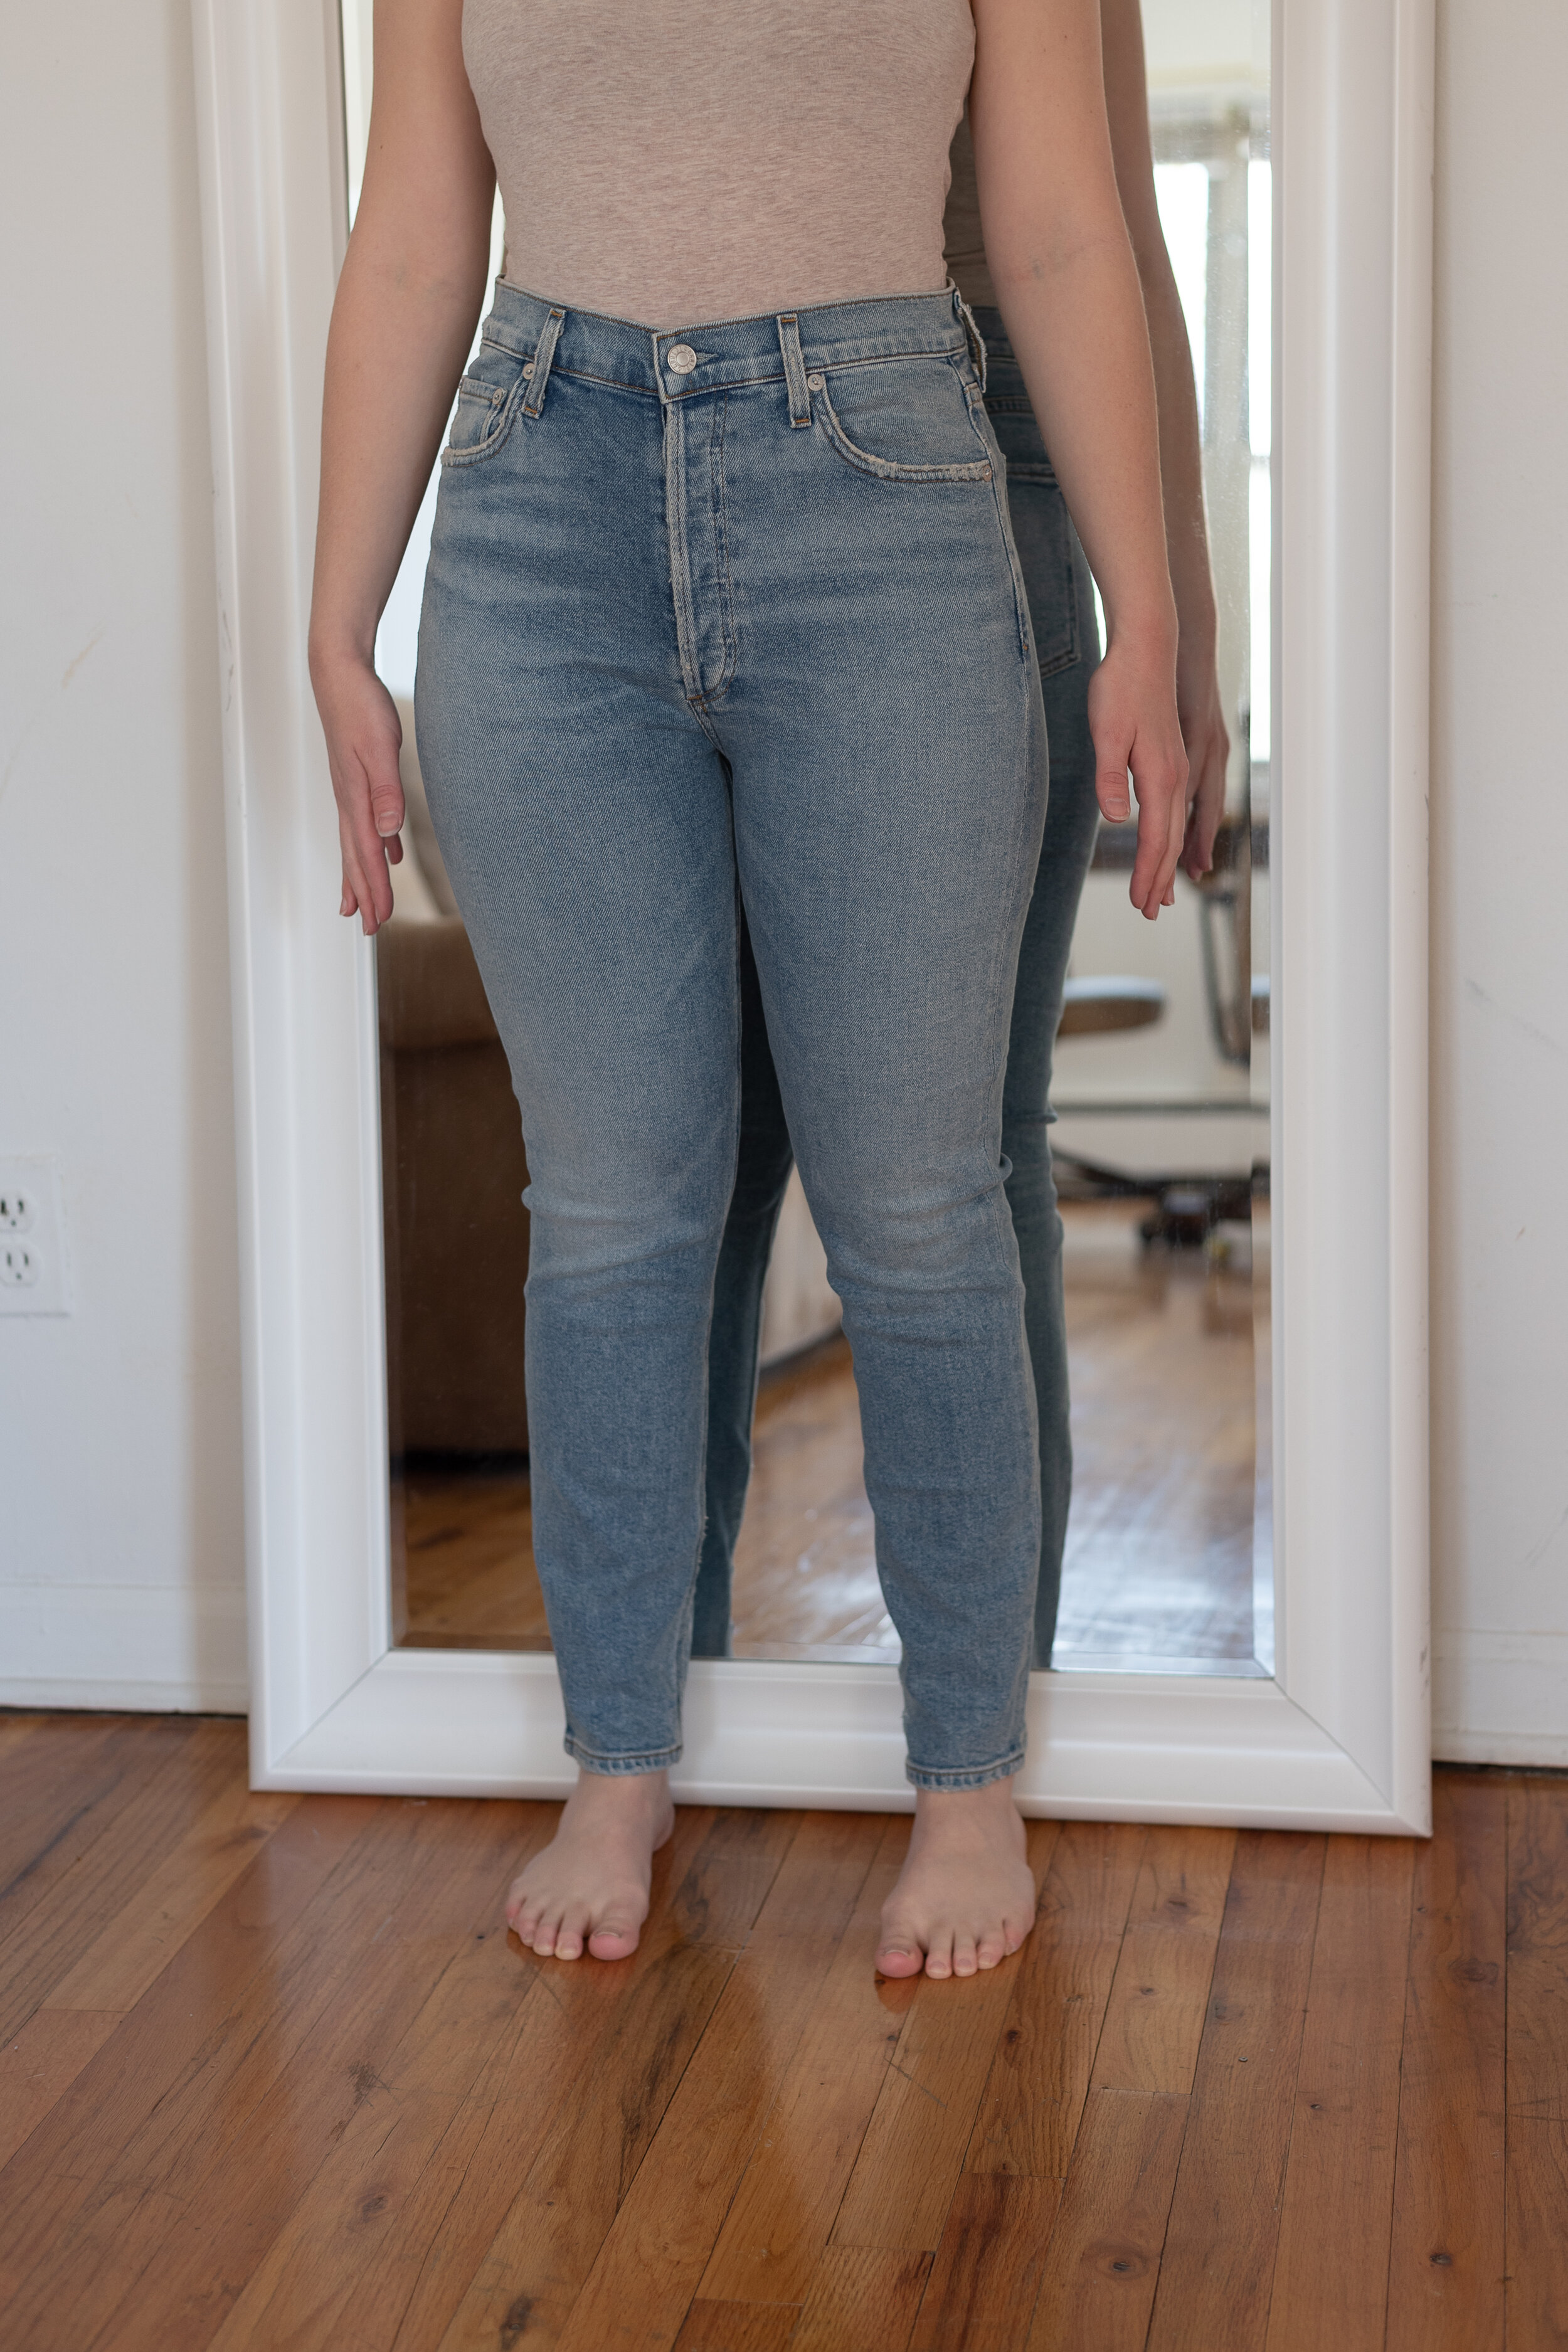 Jeans That Look Great on Short Women and Petites